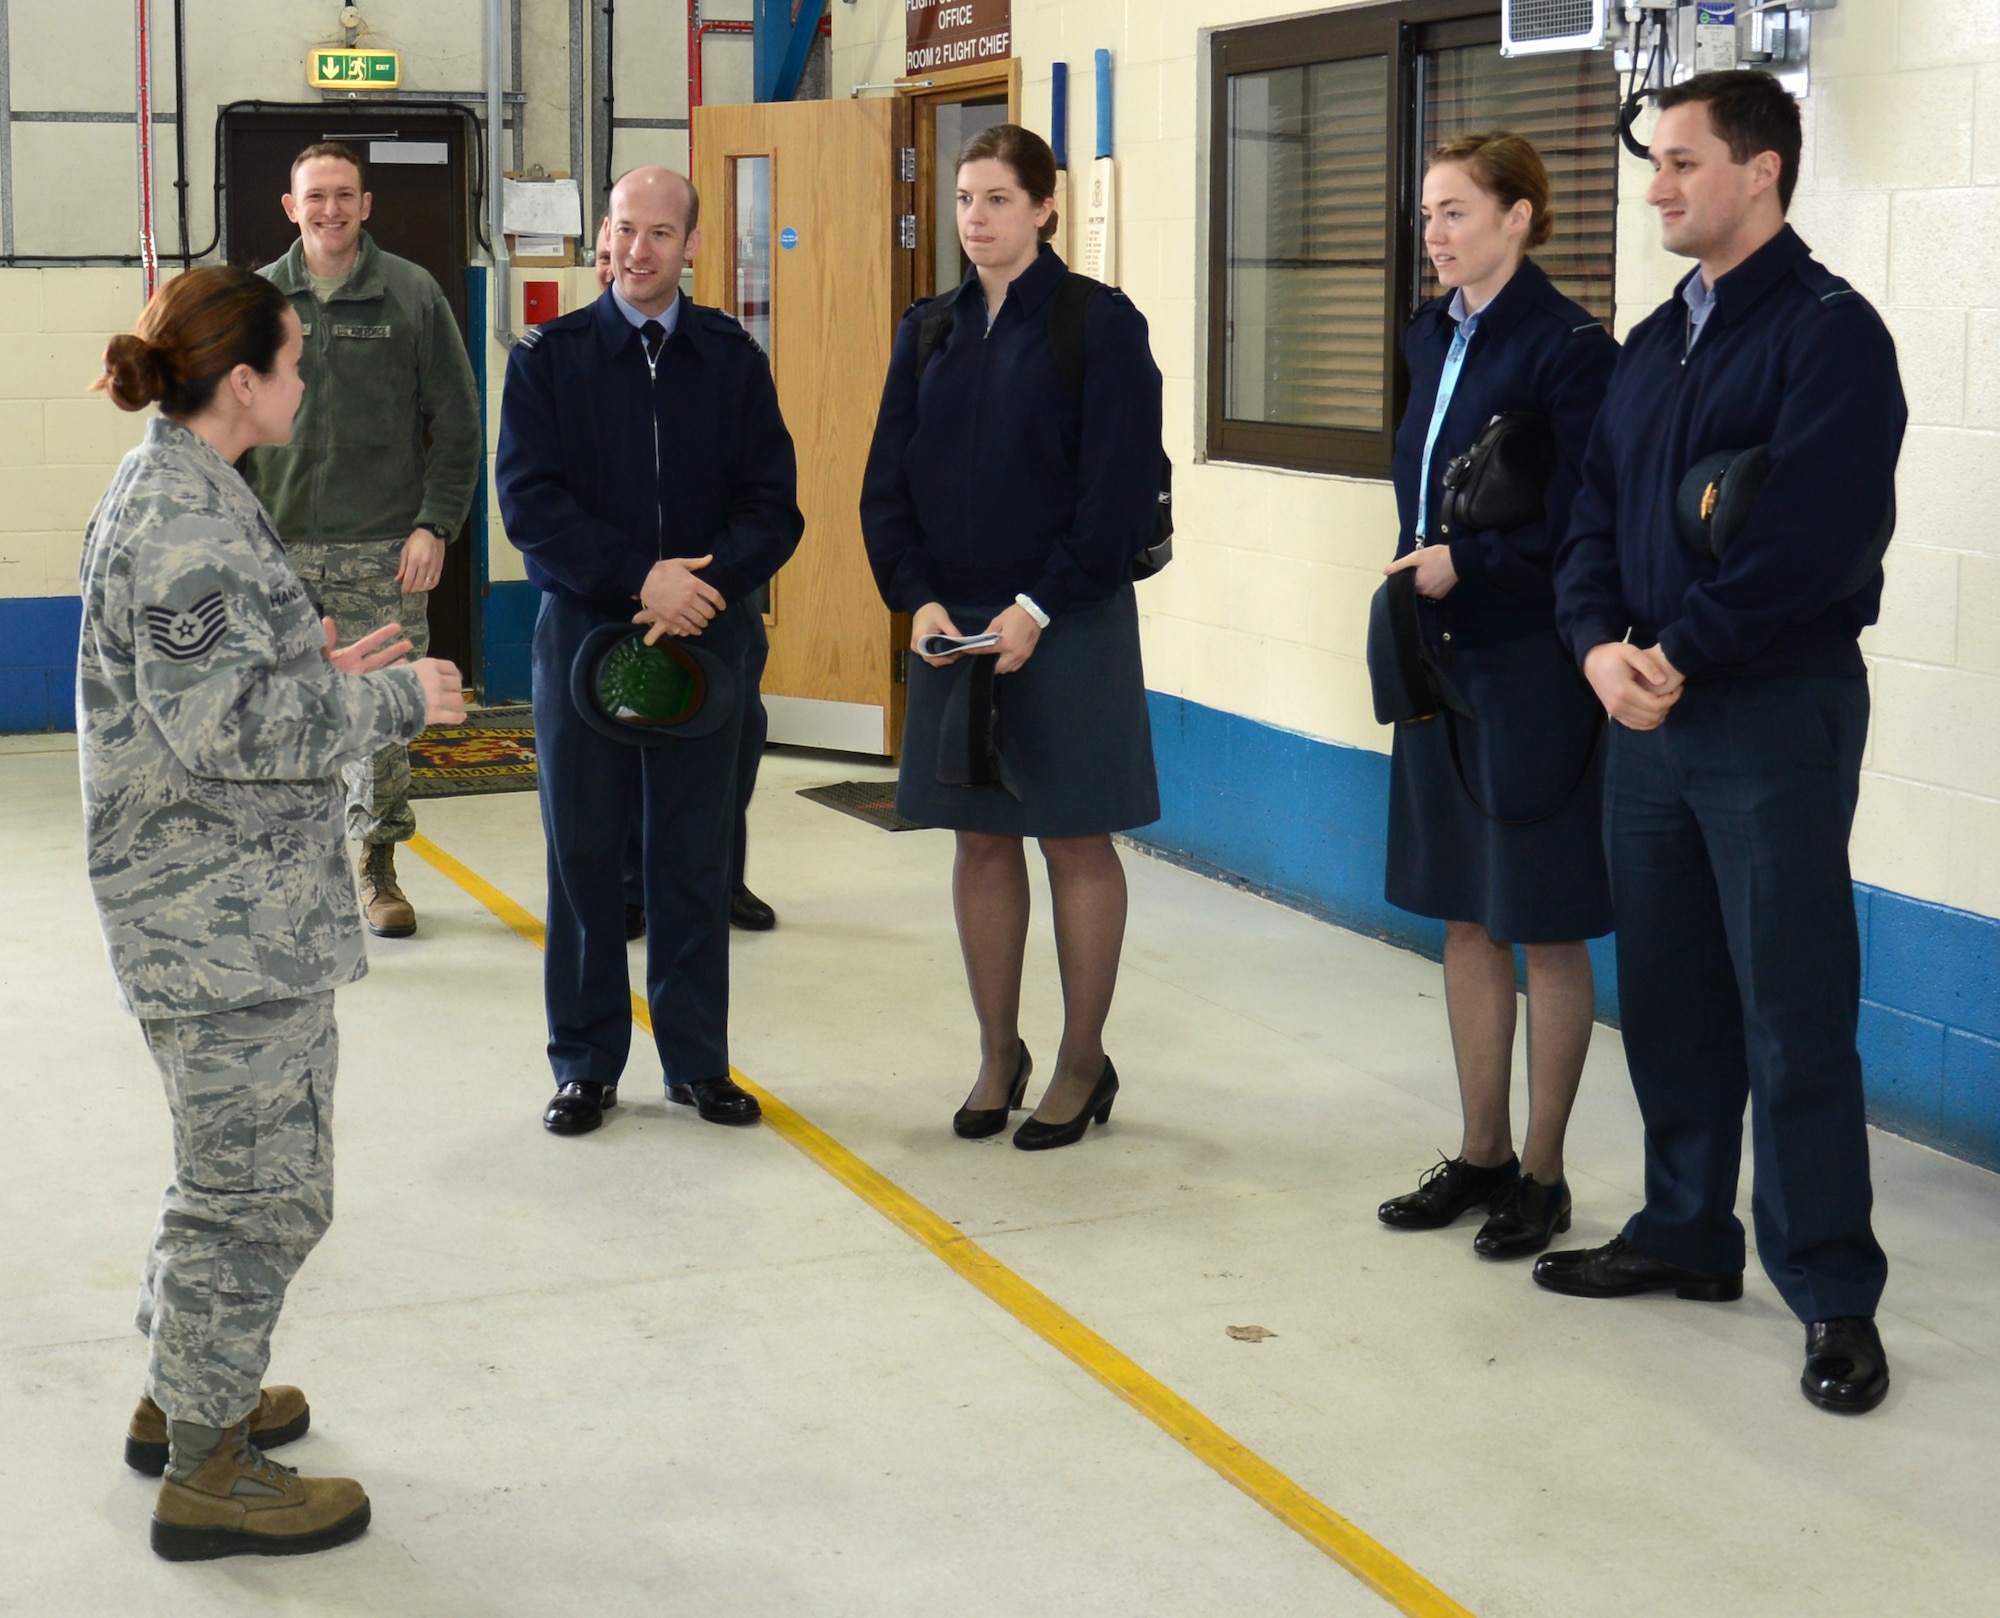 U.S. Air Force Tech. Sgt. Amy Chandler, left, 100th Logistics Readiness Squadron Vehicle Maintenance NCO in charge of general purpose vehicles from New Orleans, La., briefs Royal Air Force Logistics officers during a tour of the 100th LRS Feb. 24, 2015, on RAF Mildenhall, England. RAF Logistics officers visited with members of the 100th LRS during a site tour to further improve relations between the two nations. (U.S. Air Force photo by Gina Randall/Released)